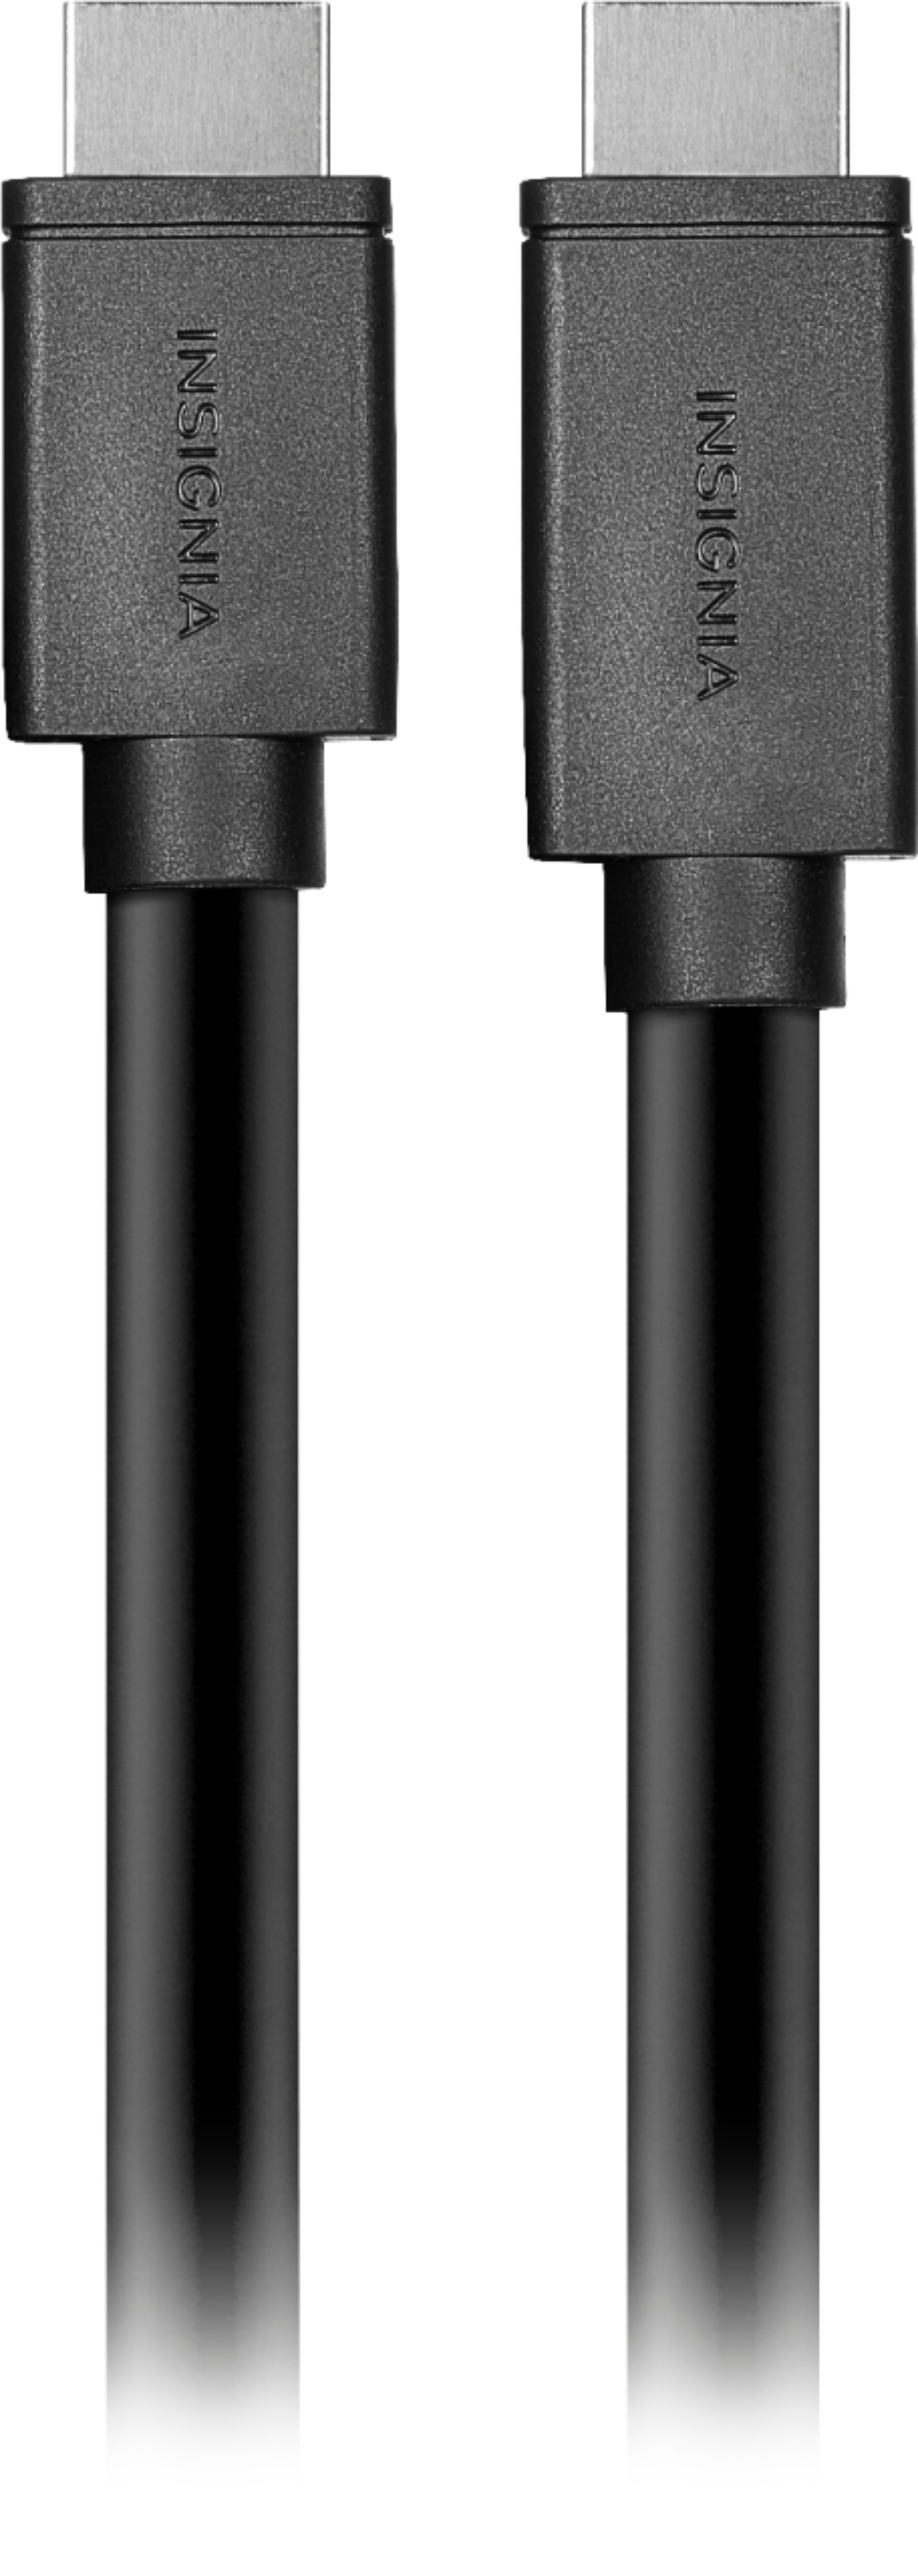 micro hdmi to hdmi cable - Best Buy